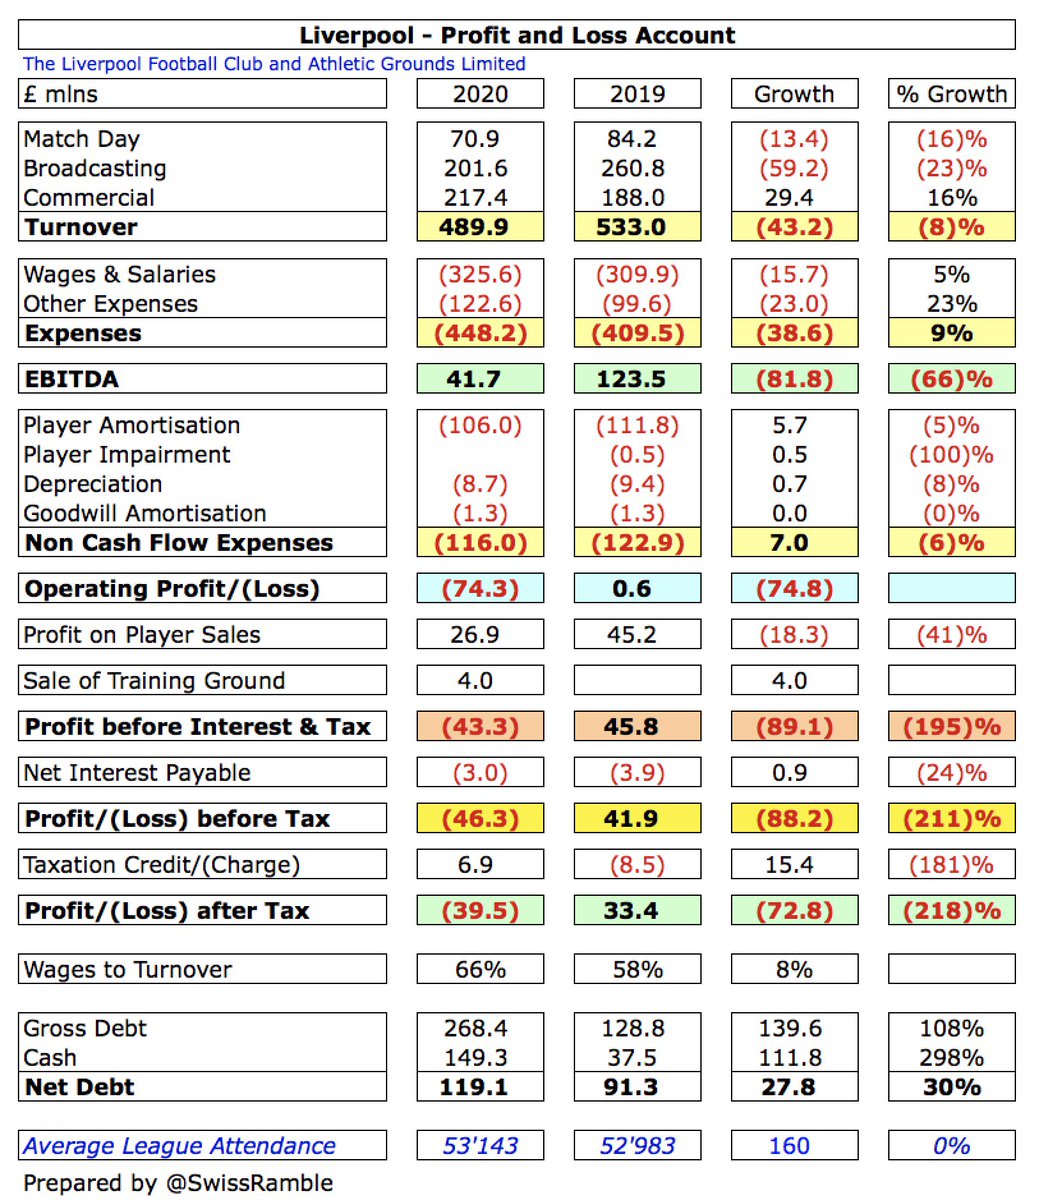  #LFC swung from £42m profit before tax to £46m loss, as impact of COVID-19 resulted in revenue falling £43m (8%) from £533m to £490m, while expenses increased £31m (6%). Profit on player sales fell £18m to £27m, but £4m gain from sale of Melwood. Loss after tax was £39m.